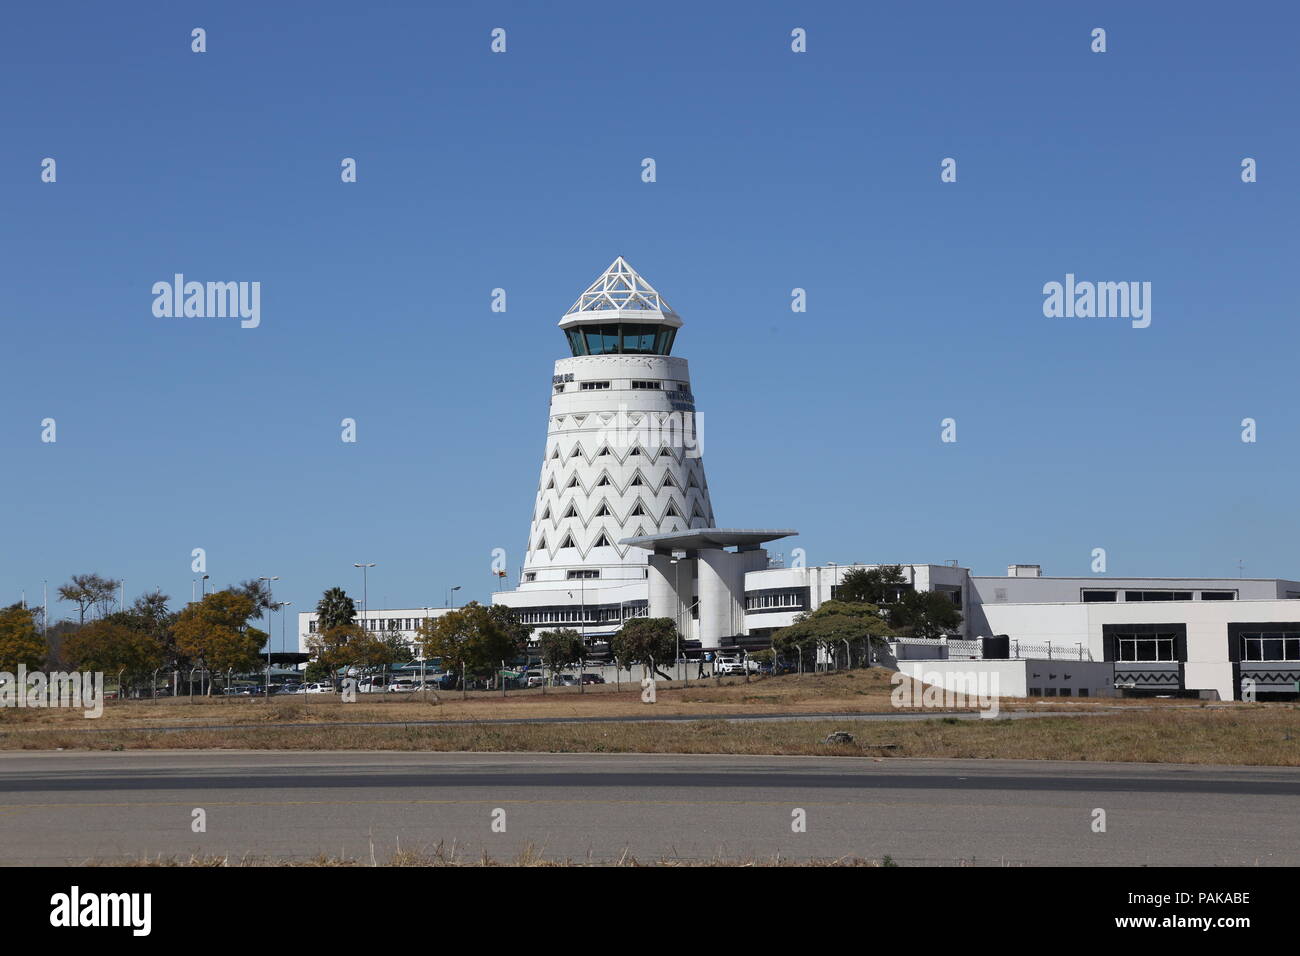 Harare, Zimbabwe. 23rd July 2018. Photo taken on July 23, 2018 shows the Robert Gabriel Mugabe International Airport in Harare, Zimbabwe. Zimbabwe's main airport is set to undergo a major facelift to be funded by China as part of the government's efforts to transform the facility into a regional aviation hub. (Xinhua/Zhang Yuliang) Credit: Xinhua/Alamy Live News Stock Photo